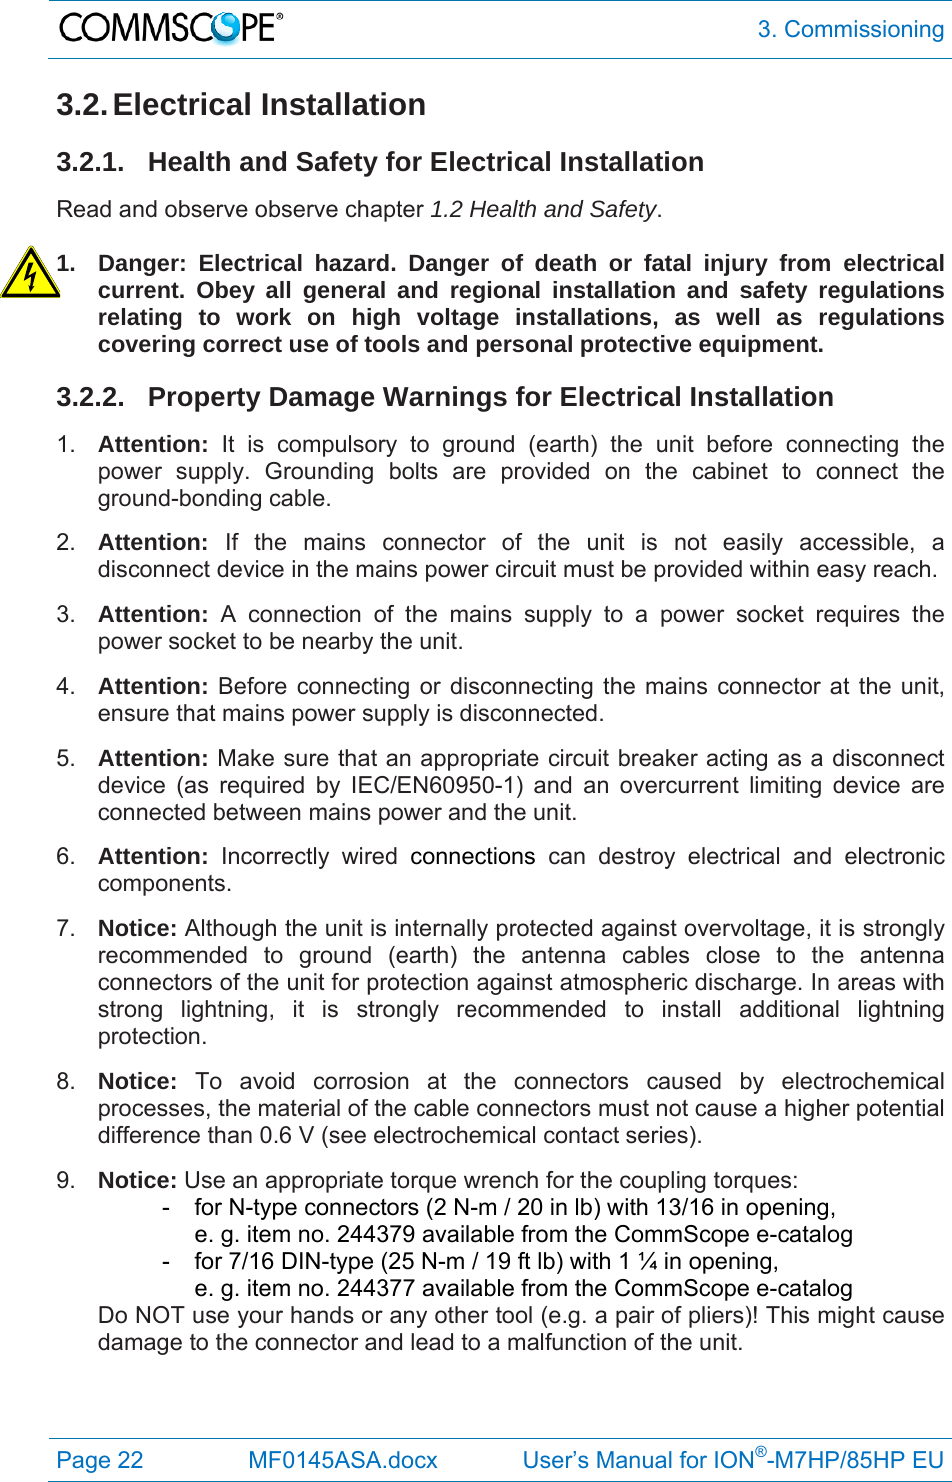  3. Commissioning Page 22  MF0145ASA.docx             User’s Manual for ION®-M7HP/85HP EU 3.2. Electrical  Installation 3.2.1. Health and Safety for Electrical Installation Read and observe observe chapter 1.2 Health and Safety.  1.  Danger: Electrical hazard. Danger of death or fatal injury from electrical current. Obey all general and regional installation and safety regulations relating to work on high voltage installations, as well as regulations covering correct use of tools and personal protective equipment. 3.2.2.  Property Damage Warnings for Electrical Installation 1.  Attention: It is compulsory to ground (earth) the unit before connecting the power supply. Grounding bolts are provided on the cabinet to connect the ground-bonding cable. 2.  Attention:  If the mains connector of the unit is not easily accessible, a disconnect device in the mains power circuit must be provided within easy reach. 3.  Attention: A connection of the mains supply to a power socket requires the power socket to be nearby the unit. 4.  Attention: Before connecting or disconnecting the mains connector at the unit, ensure that mains power supply is disconnected. 5.  Attention: Make sure that an appropriate circuit breaker acting as a disconnect device (as required by IEC/EN60950-1) and an overcurrent limiting device are connected between mains power and the unit. 6.  Attention: Incorrectly wired connections can destroy electrical and electronic components.  7.  Notice: Although the unit is internally protected against overvoltage, it is strongly recommended to ground (earth) the antenna cables close to the antenna connectors of the unit for protection against atmospheric discharge. In areas with strong lightning, it is strongly recommended to install additional lightning protection. 8.  Notice: To avoid corrosion at the connectors caused by electrochemical processes, the material of the cable connectors must not cause a higher potential difference than 0.6 V (see electrochemical contact series). 9.  Notice: Use an appropriate torque wrench for the coupling torques:   -  for N-type connectors (2 N-m / 20 in lb) with 13/16 in opening,      e. g. item no. 244379 available from the CommScope e-catalog   -  for 7/16 DIN-type (25 N-m / 19 ft lb) with 1 ¼ in opening,      e. g. item no. 244377 available from the CommScope e-catalog Do NOT use your hands or any other tool (e.g. a pair of pliers)! This might cause damage to the connector and lead to a malfunction of the unit.   